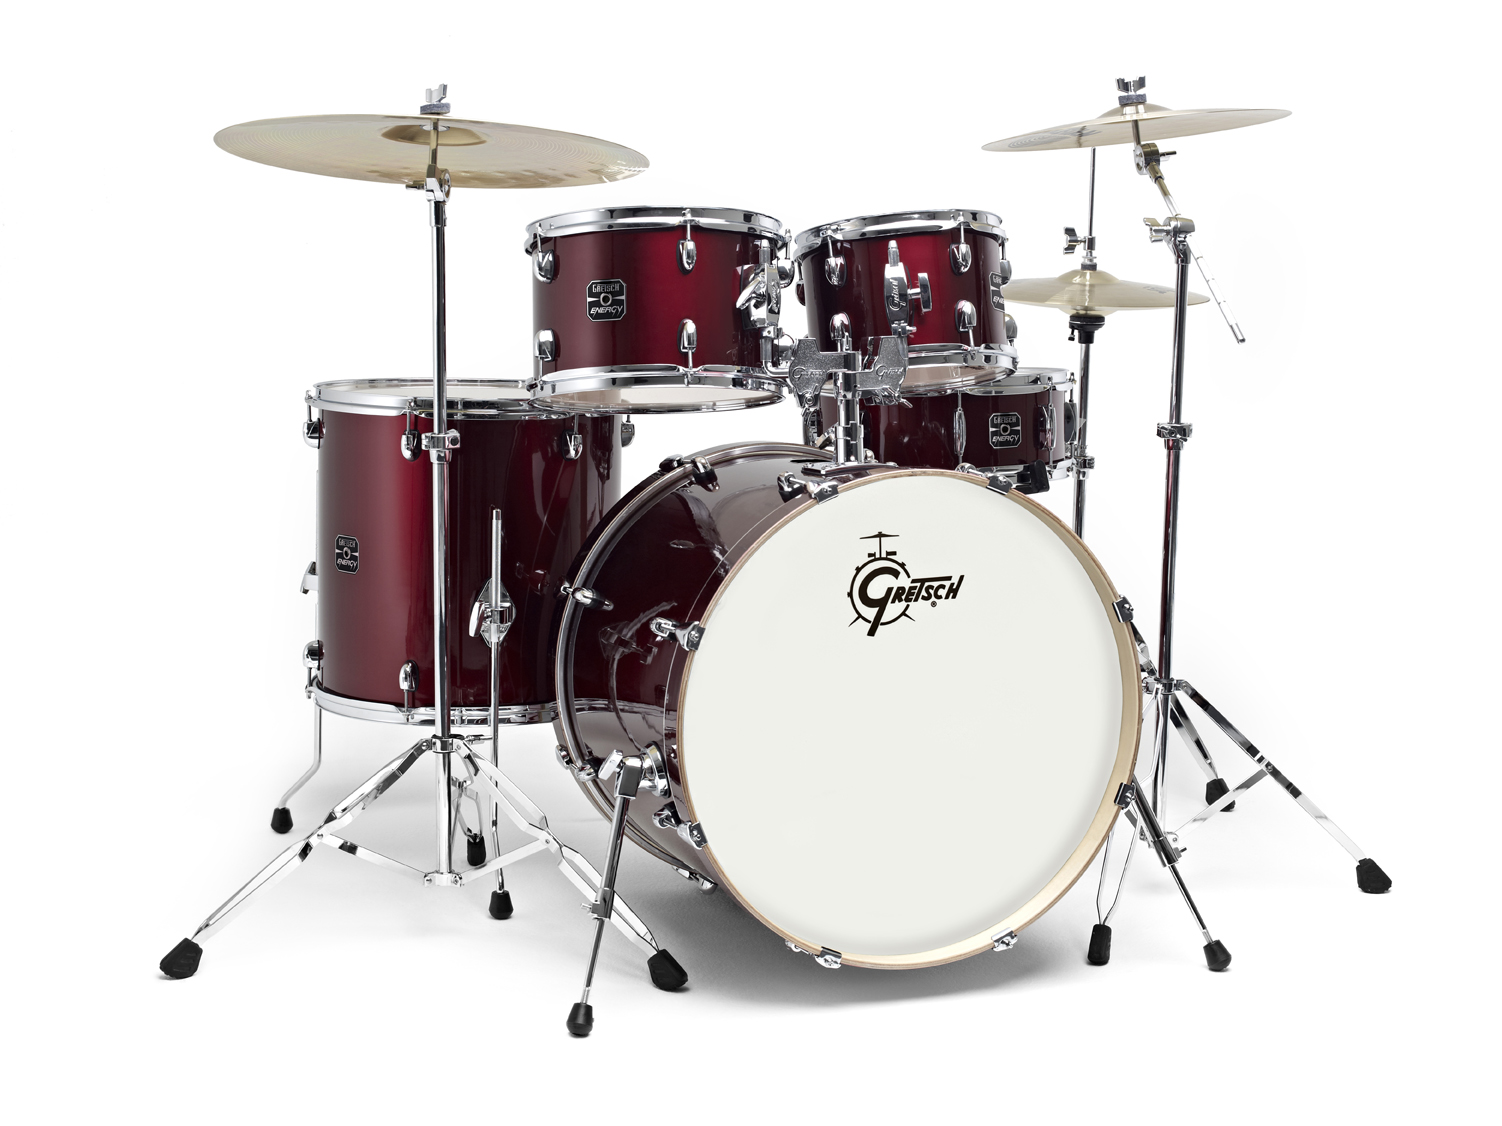 GRETSCH DRUMS GE2-E825TK-WR - NEW ENERGY STAGE 22